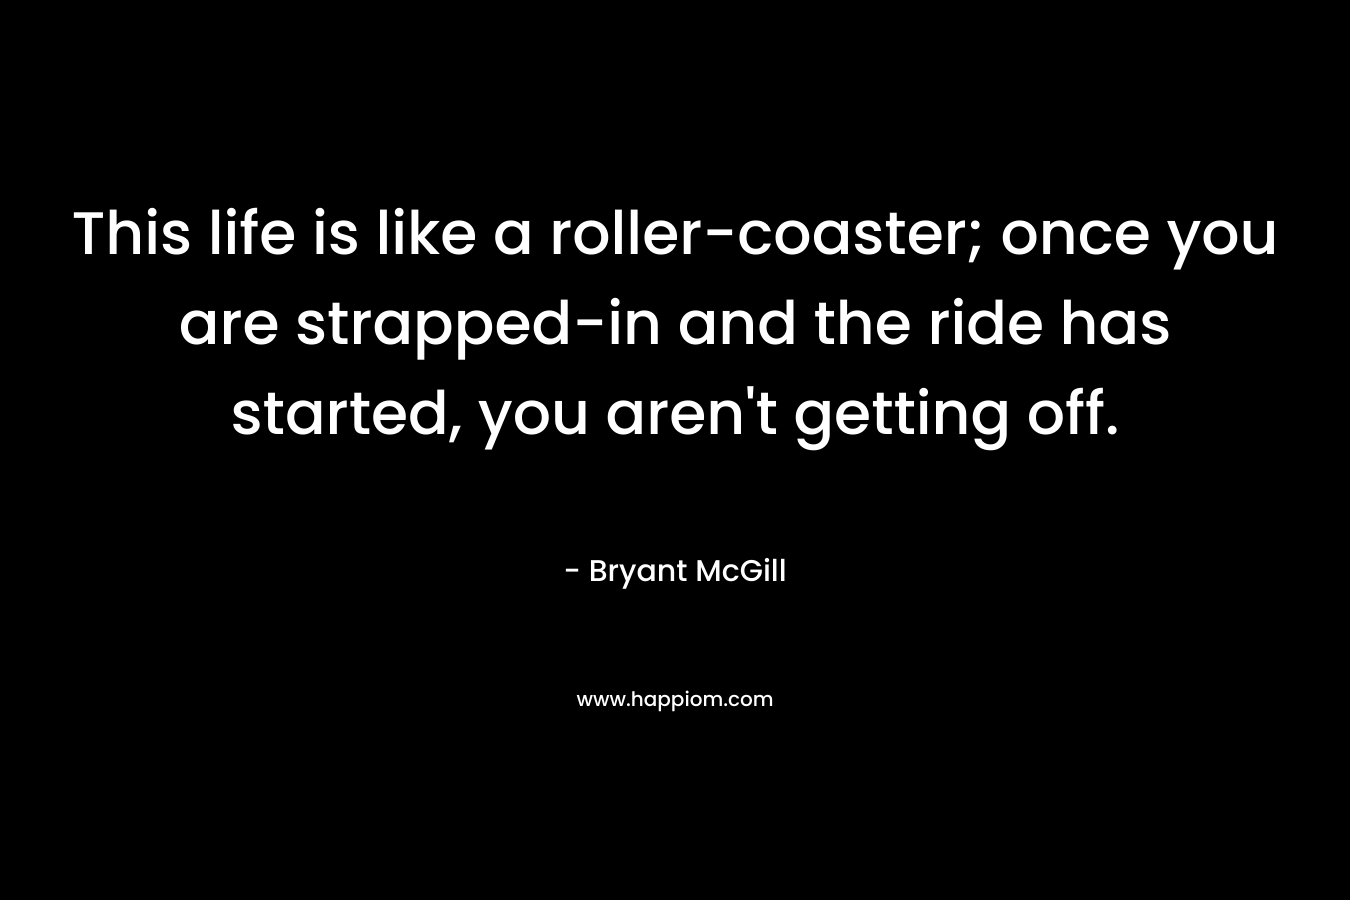 This life is like a roller-coaster; once you are strapped-in and the ride has started, you aren’t getting off. – Bryant McGill